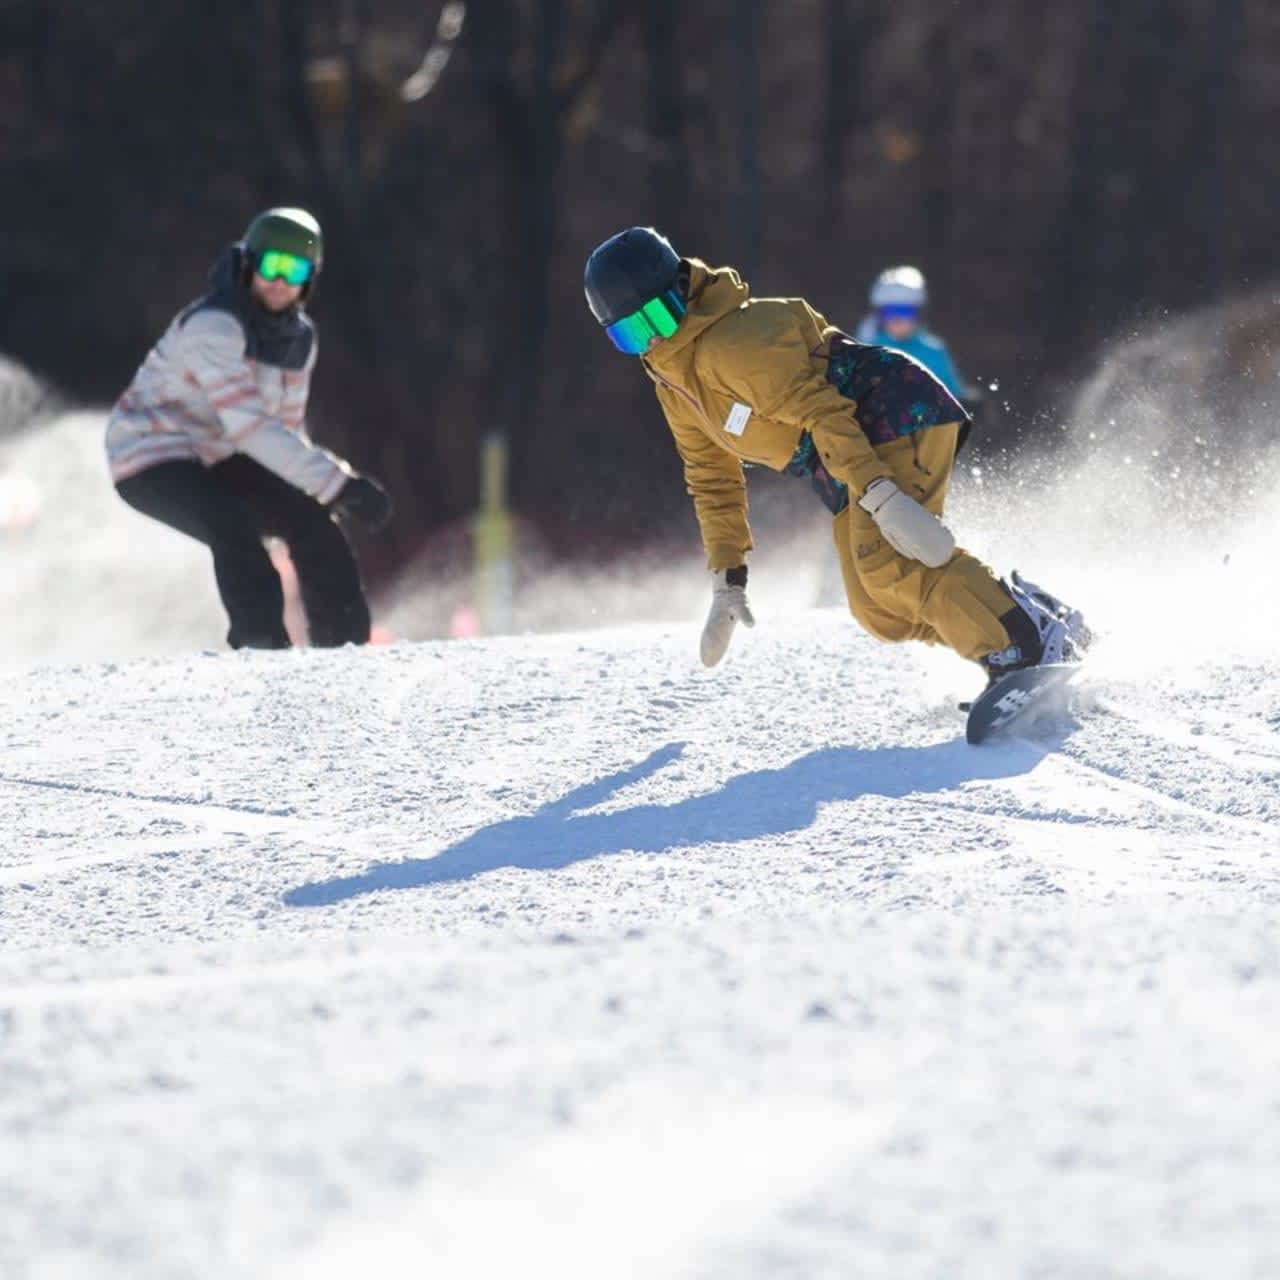 Skiers and snow boarders took to Mountain Creek's slopes in mid-November, the resort's earliest opening ever.